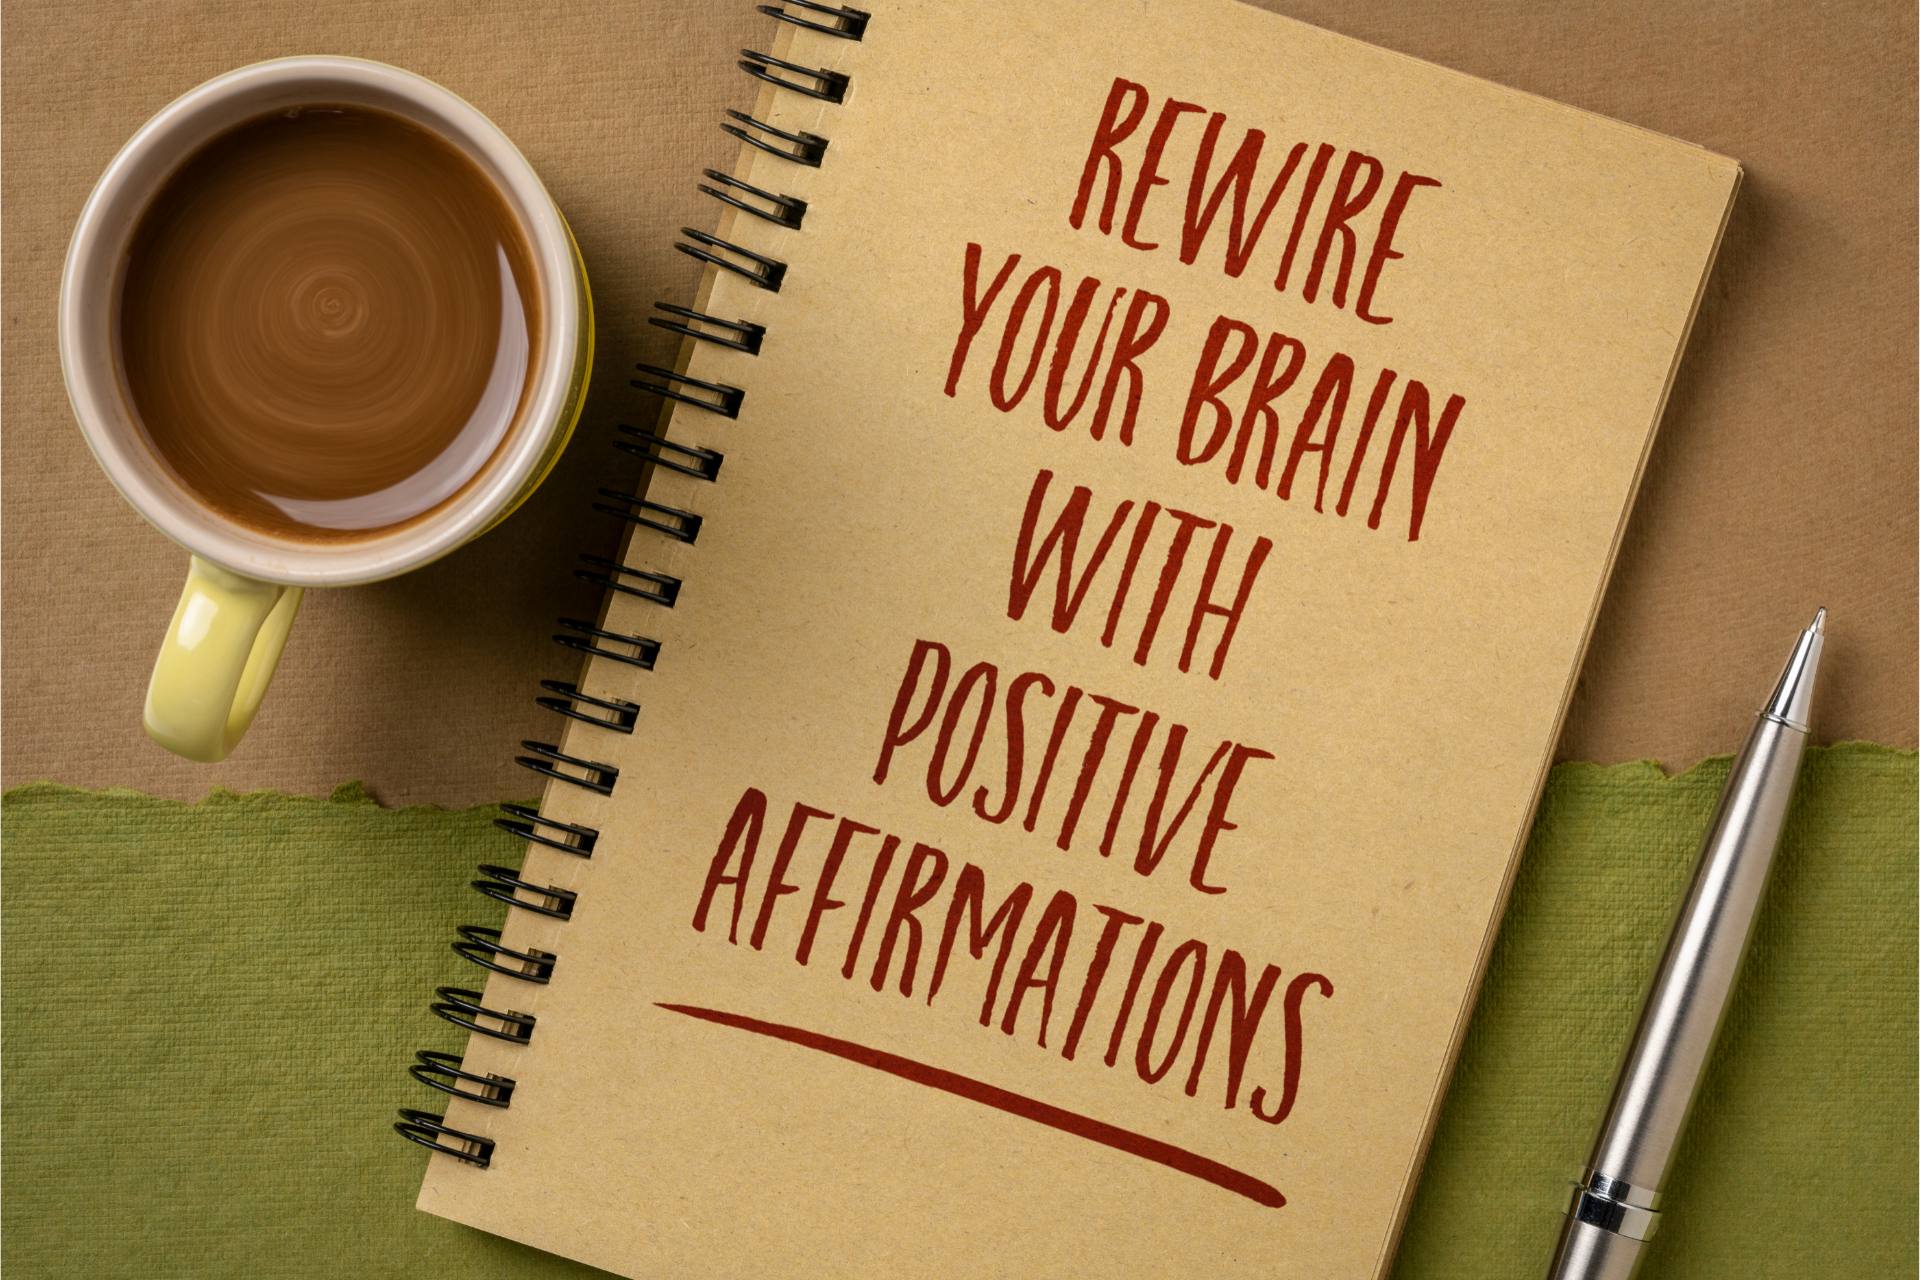 Benefits of Positive Affirmations